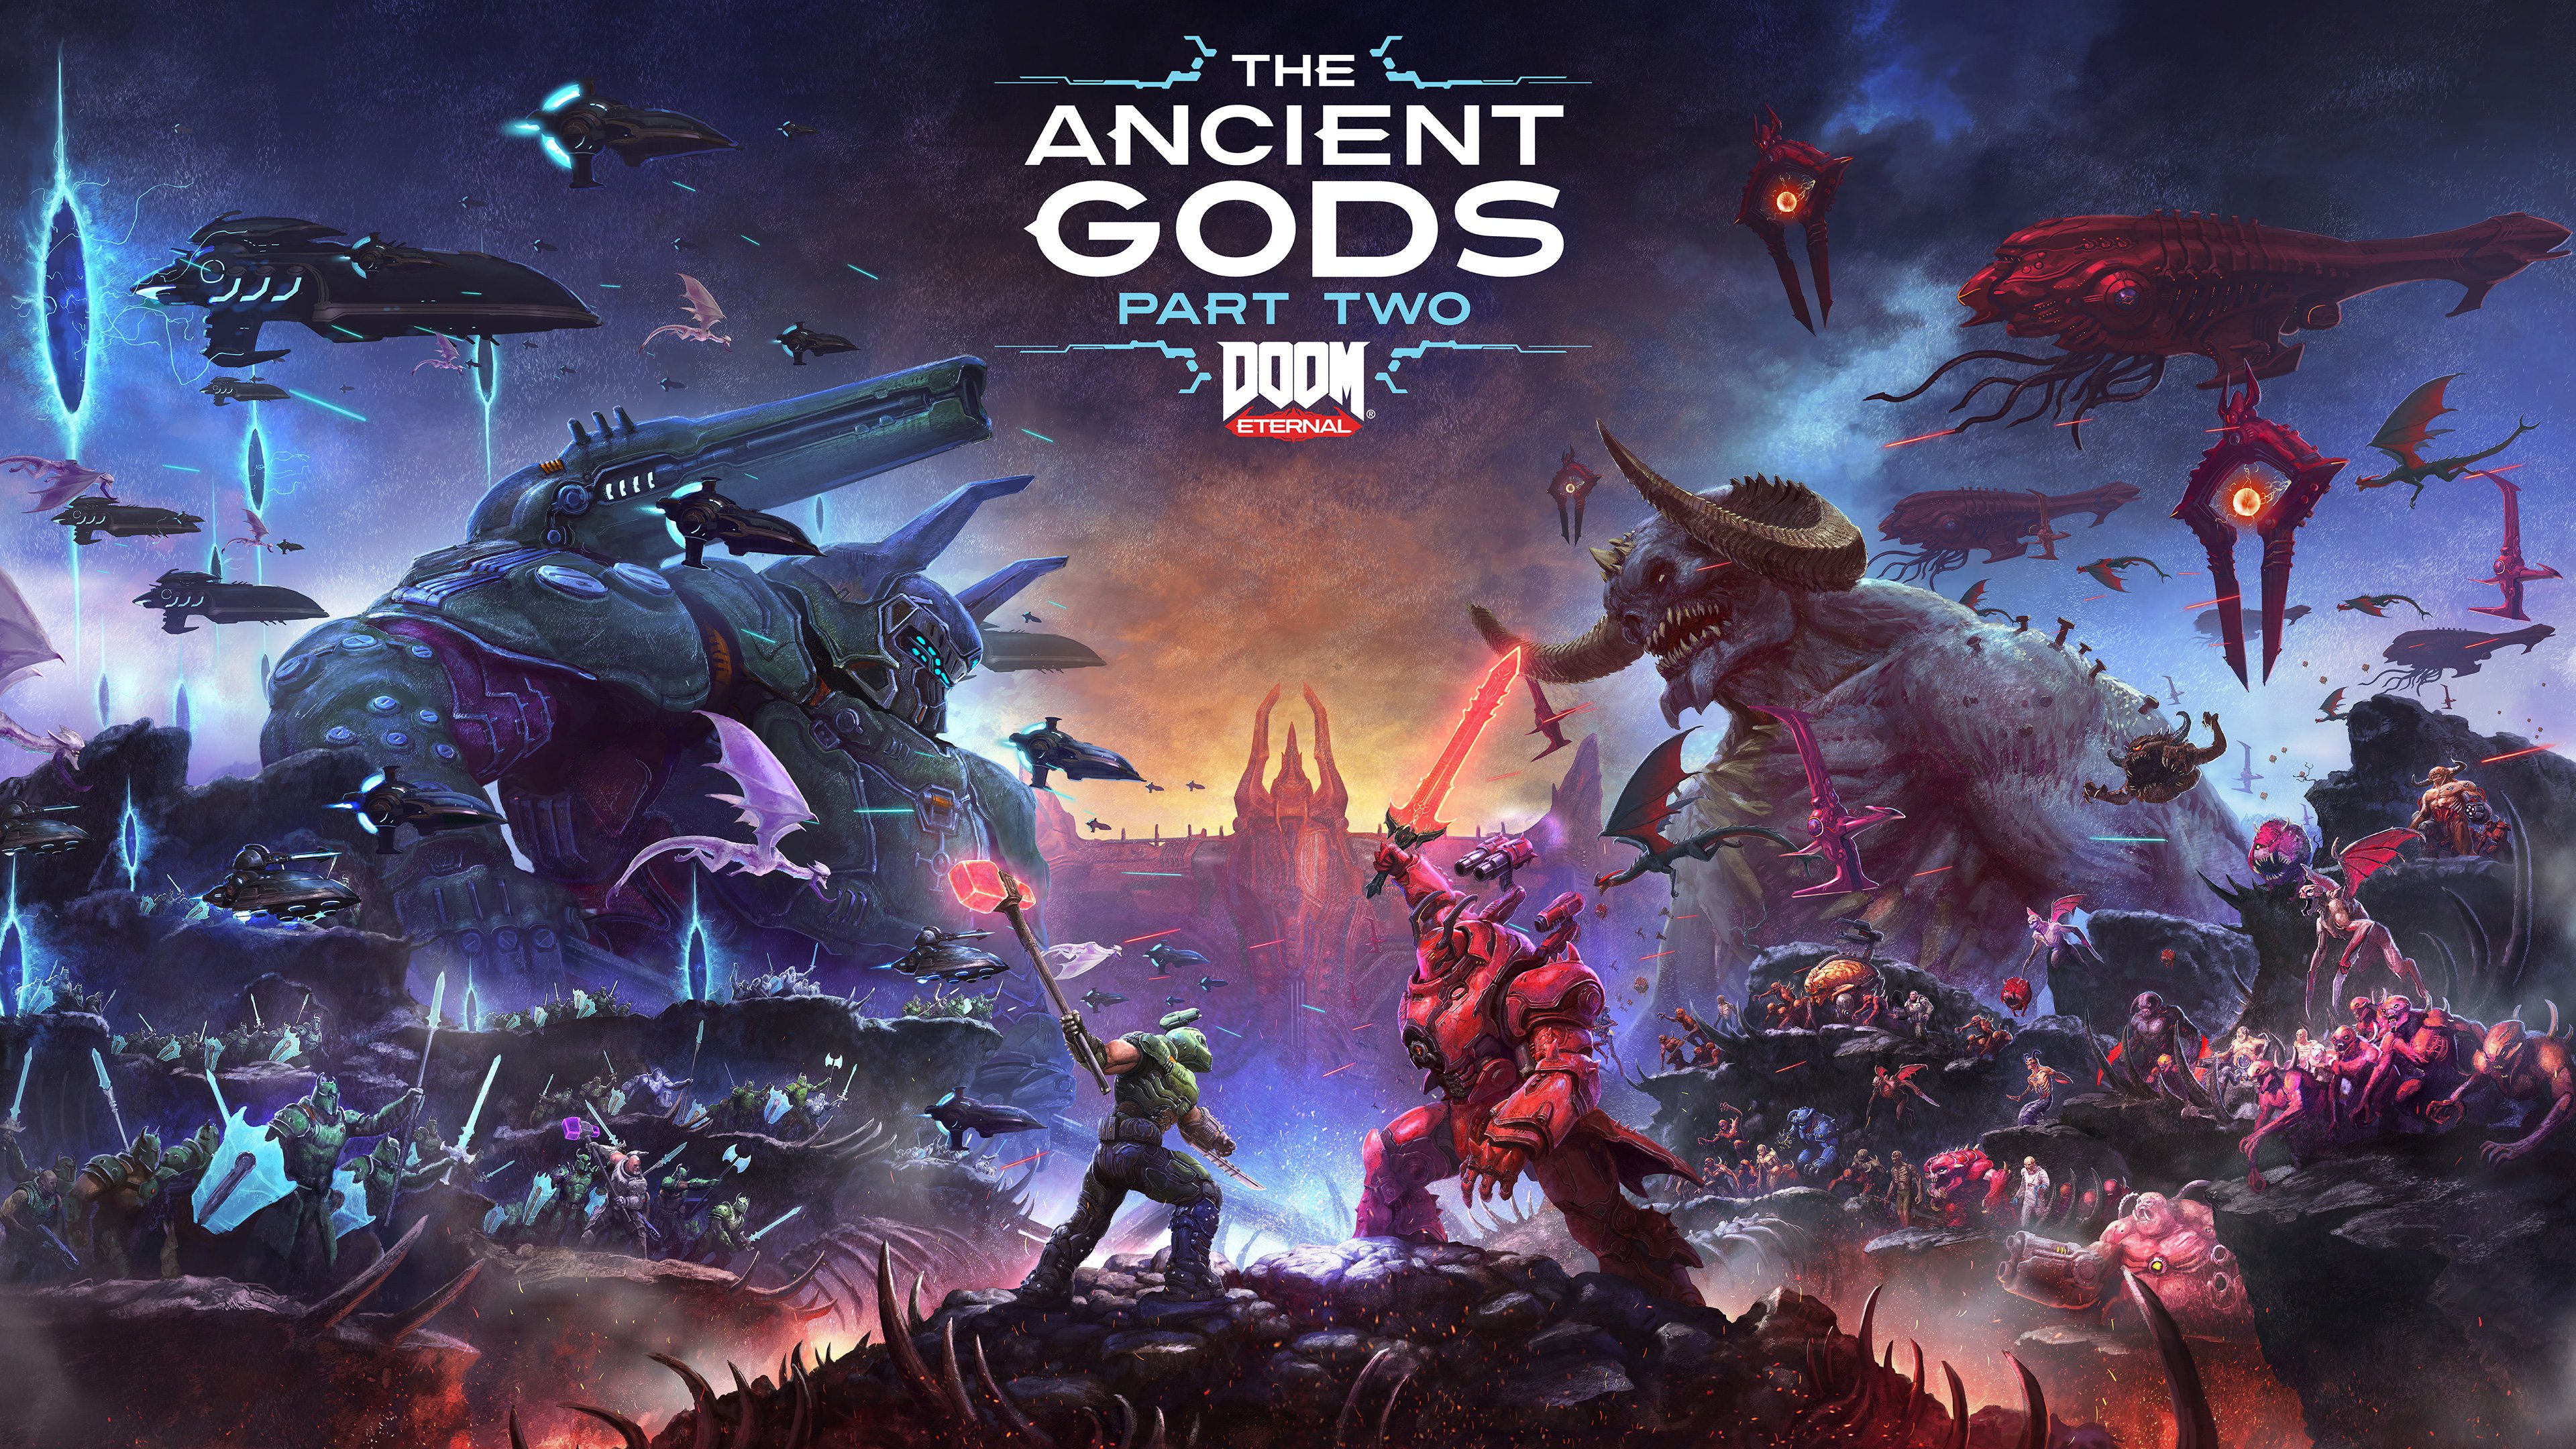 This is wallpaper-worthy key art for Doom Eternal: The Ancient Gods - Part Two.